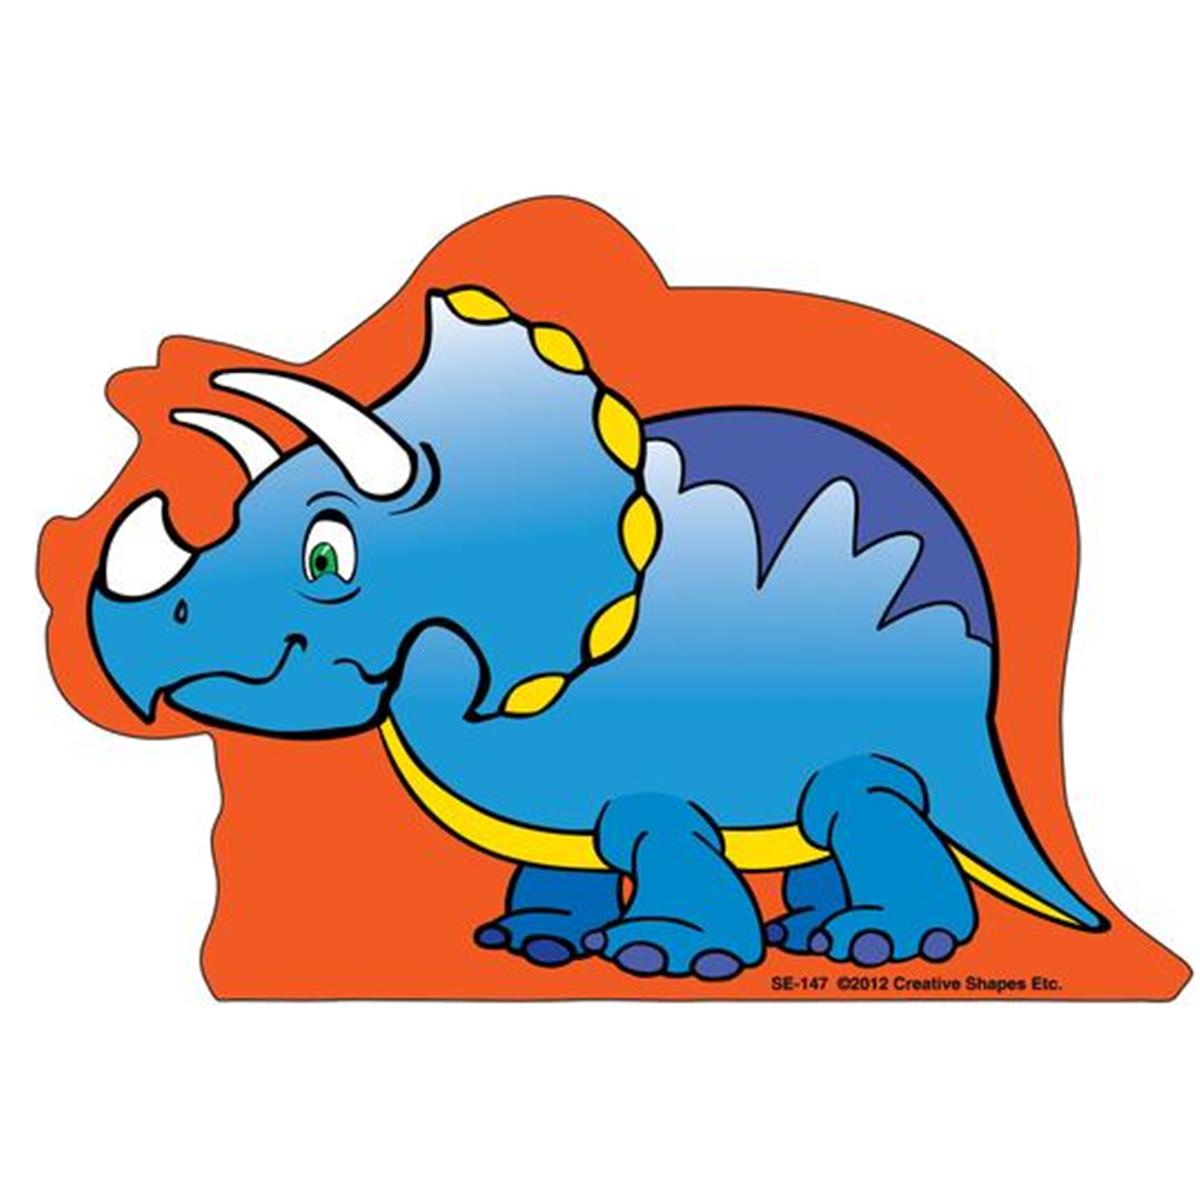 Se-147 9 X 6 In. Large Notepad, Triceratops - 50 Sheets Per Pack